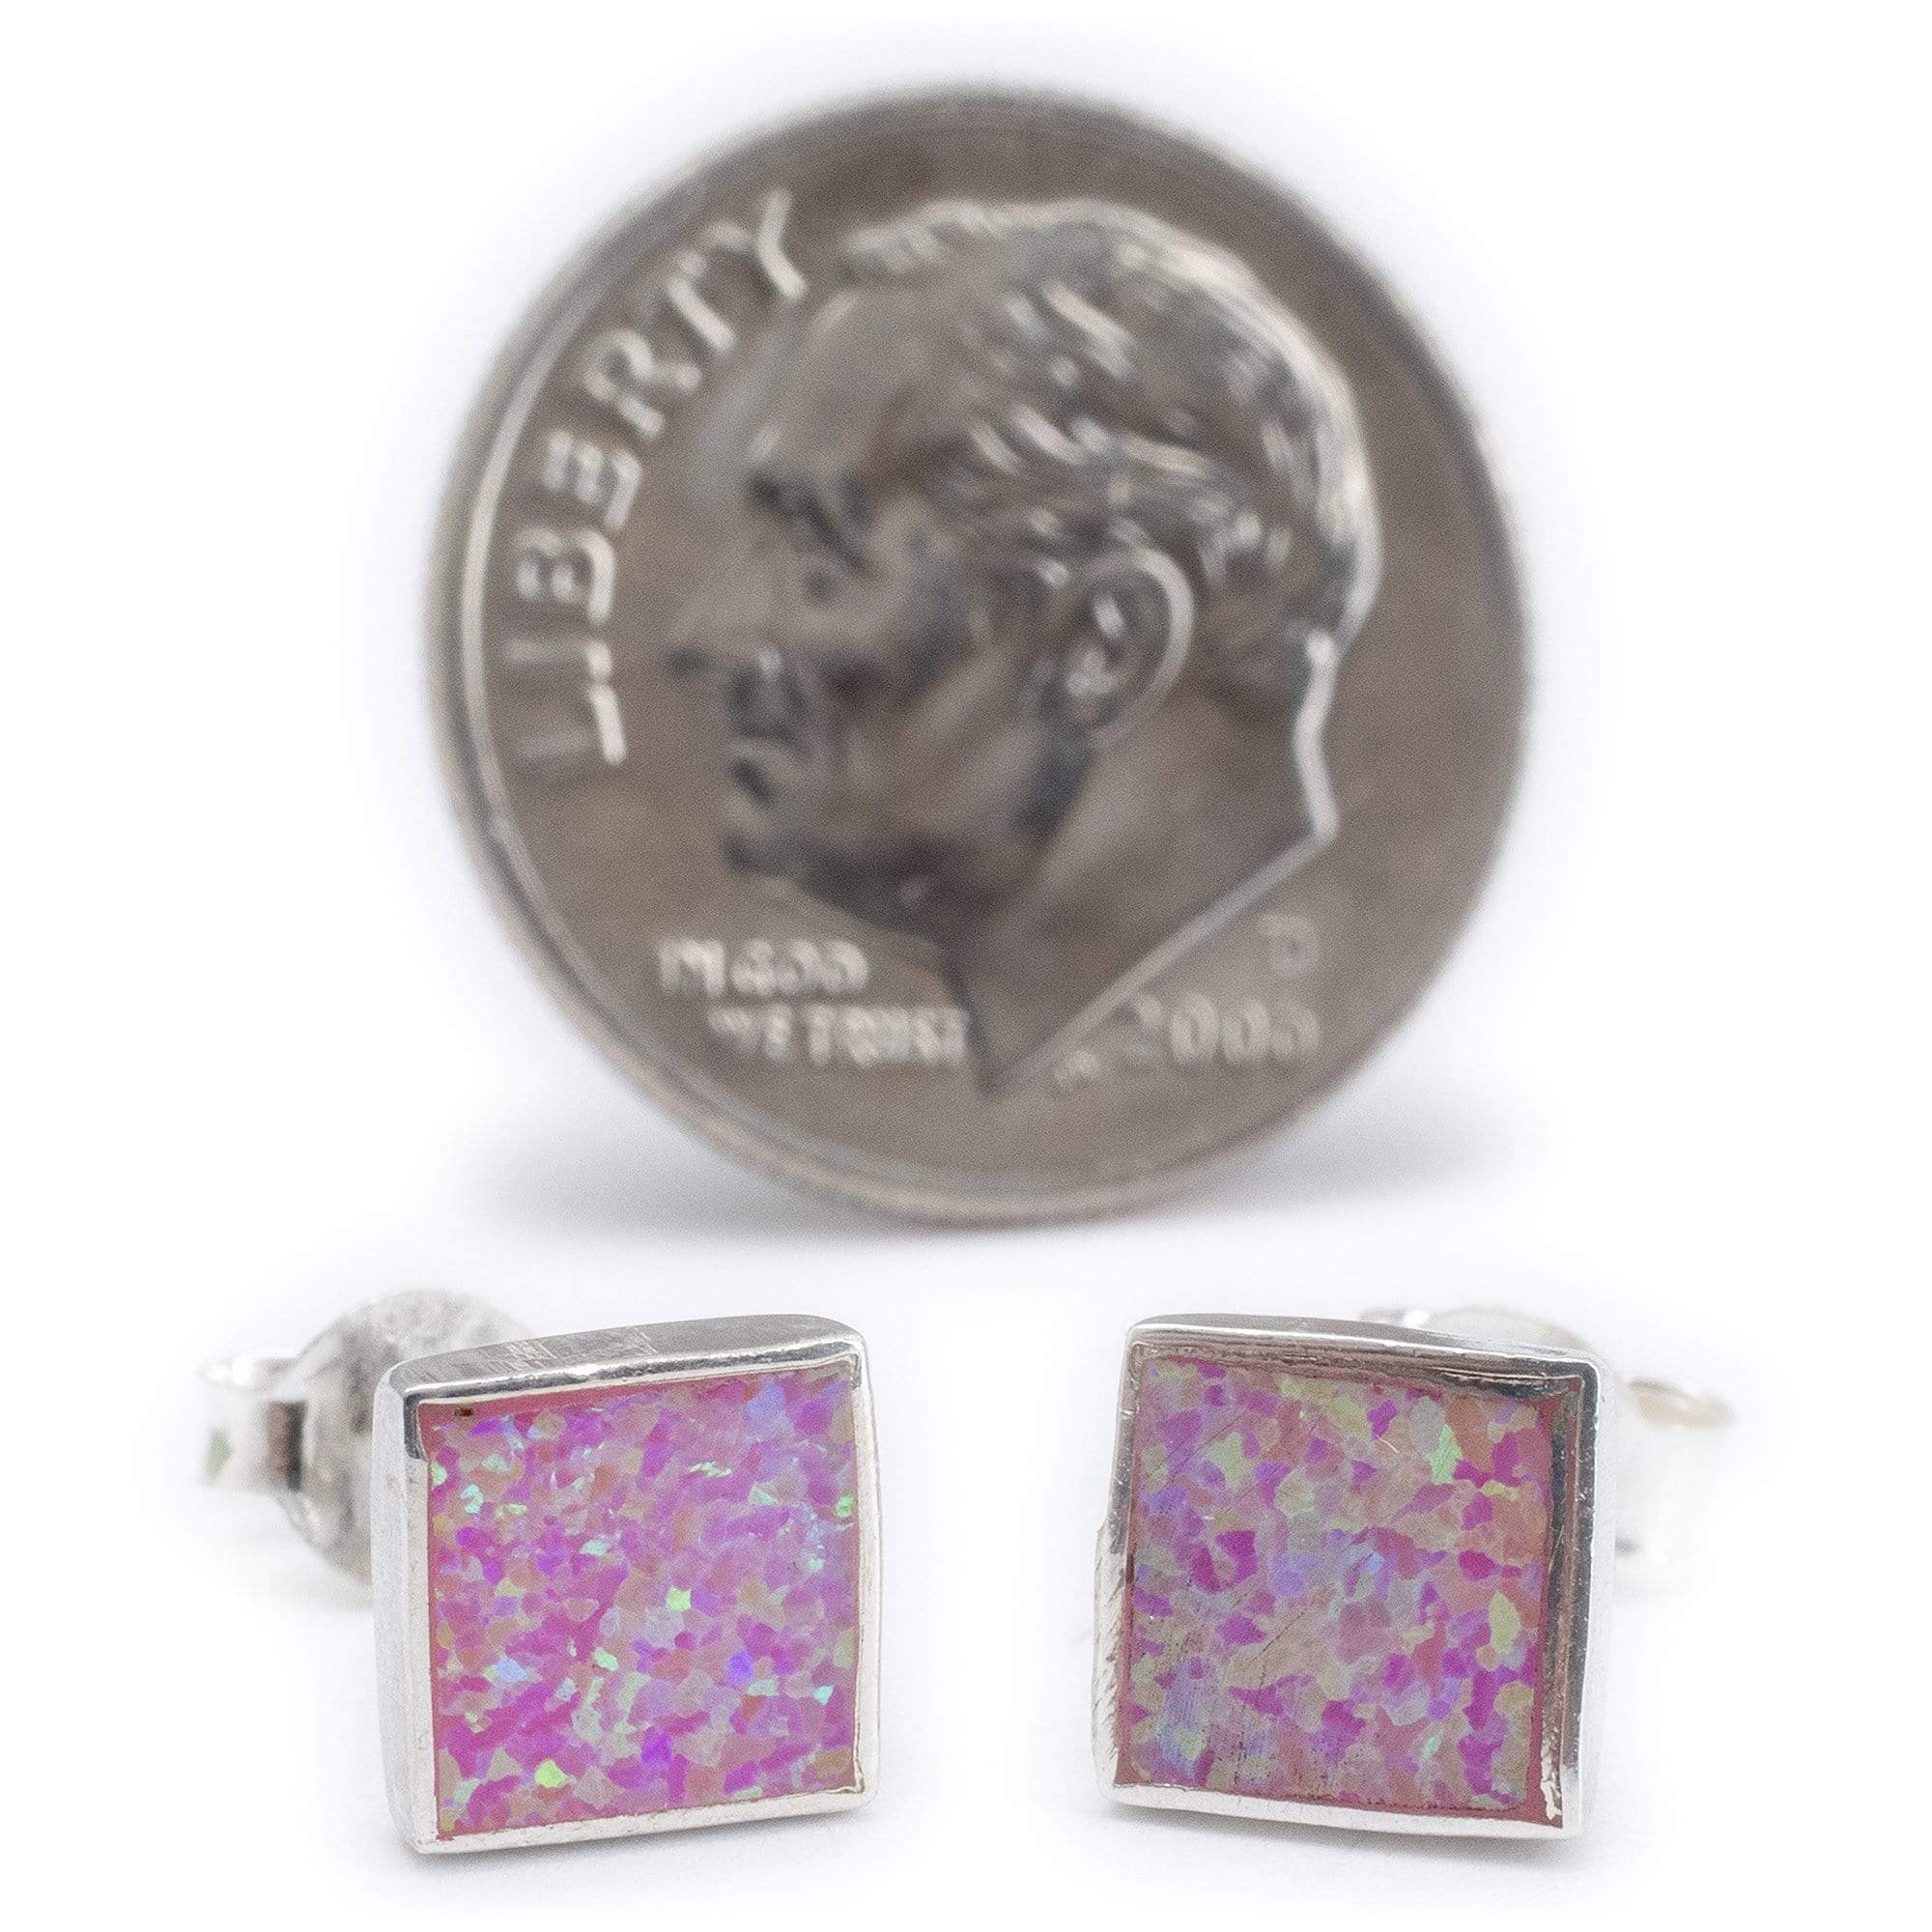 Kalifano Southwest Silver Jewelry Pink Opal Square 925 Sterling Silver Earring with Stud Backing Handmade NME.0025.PO